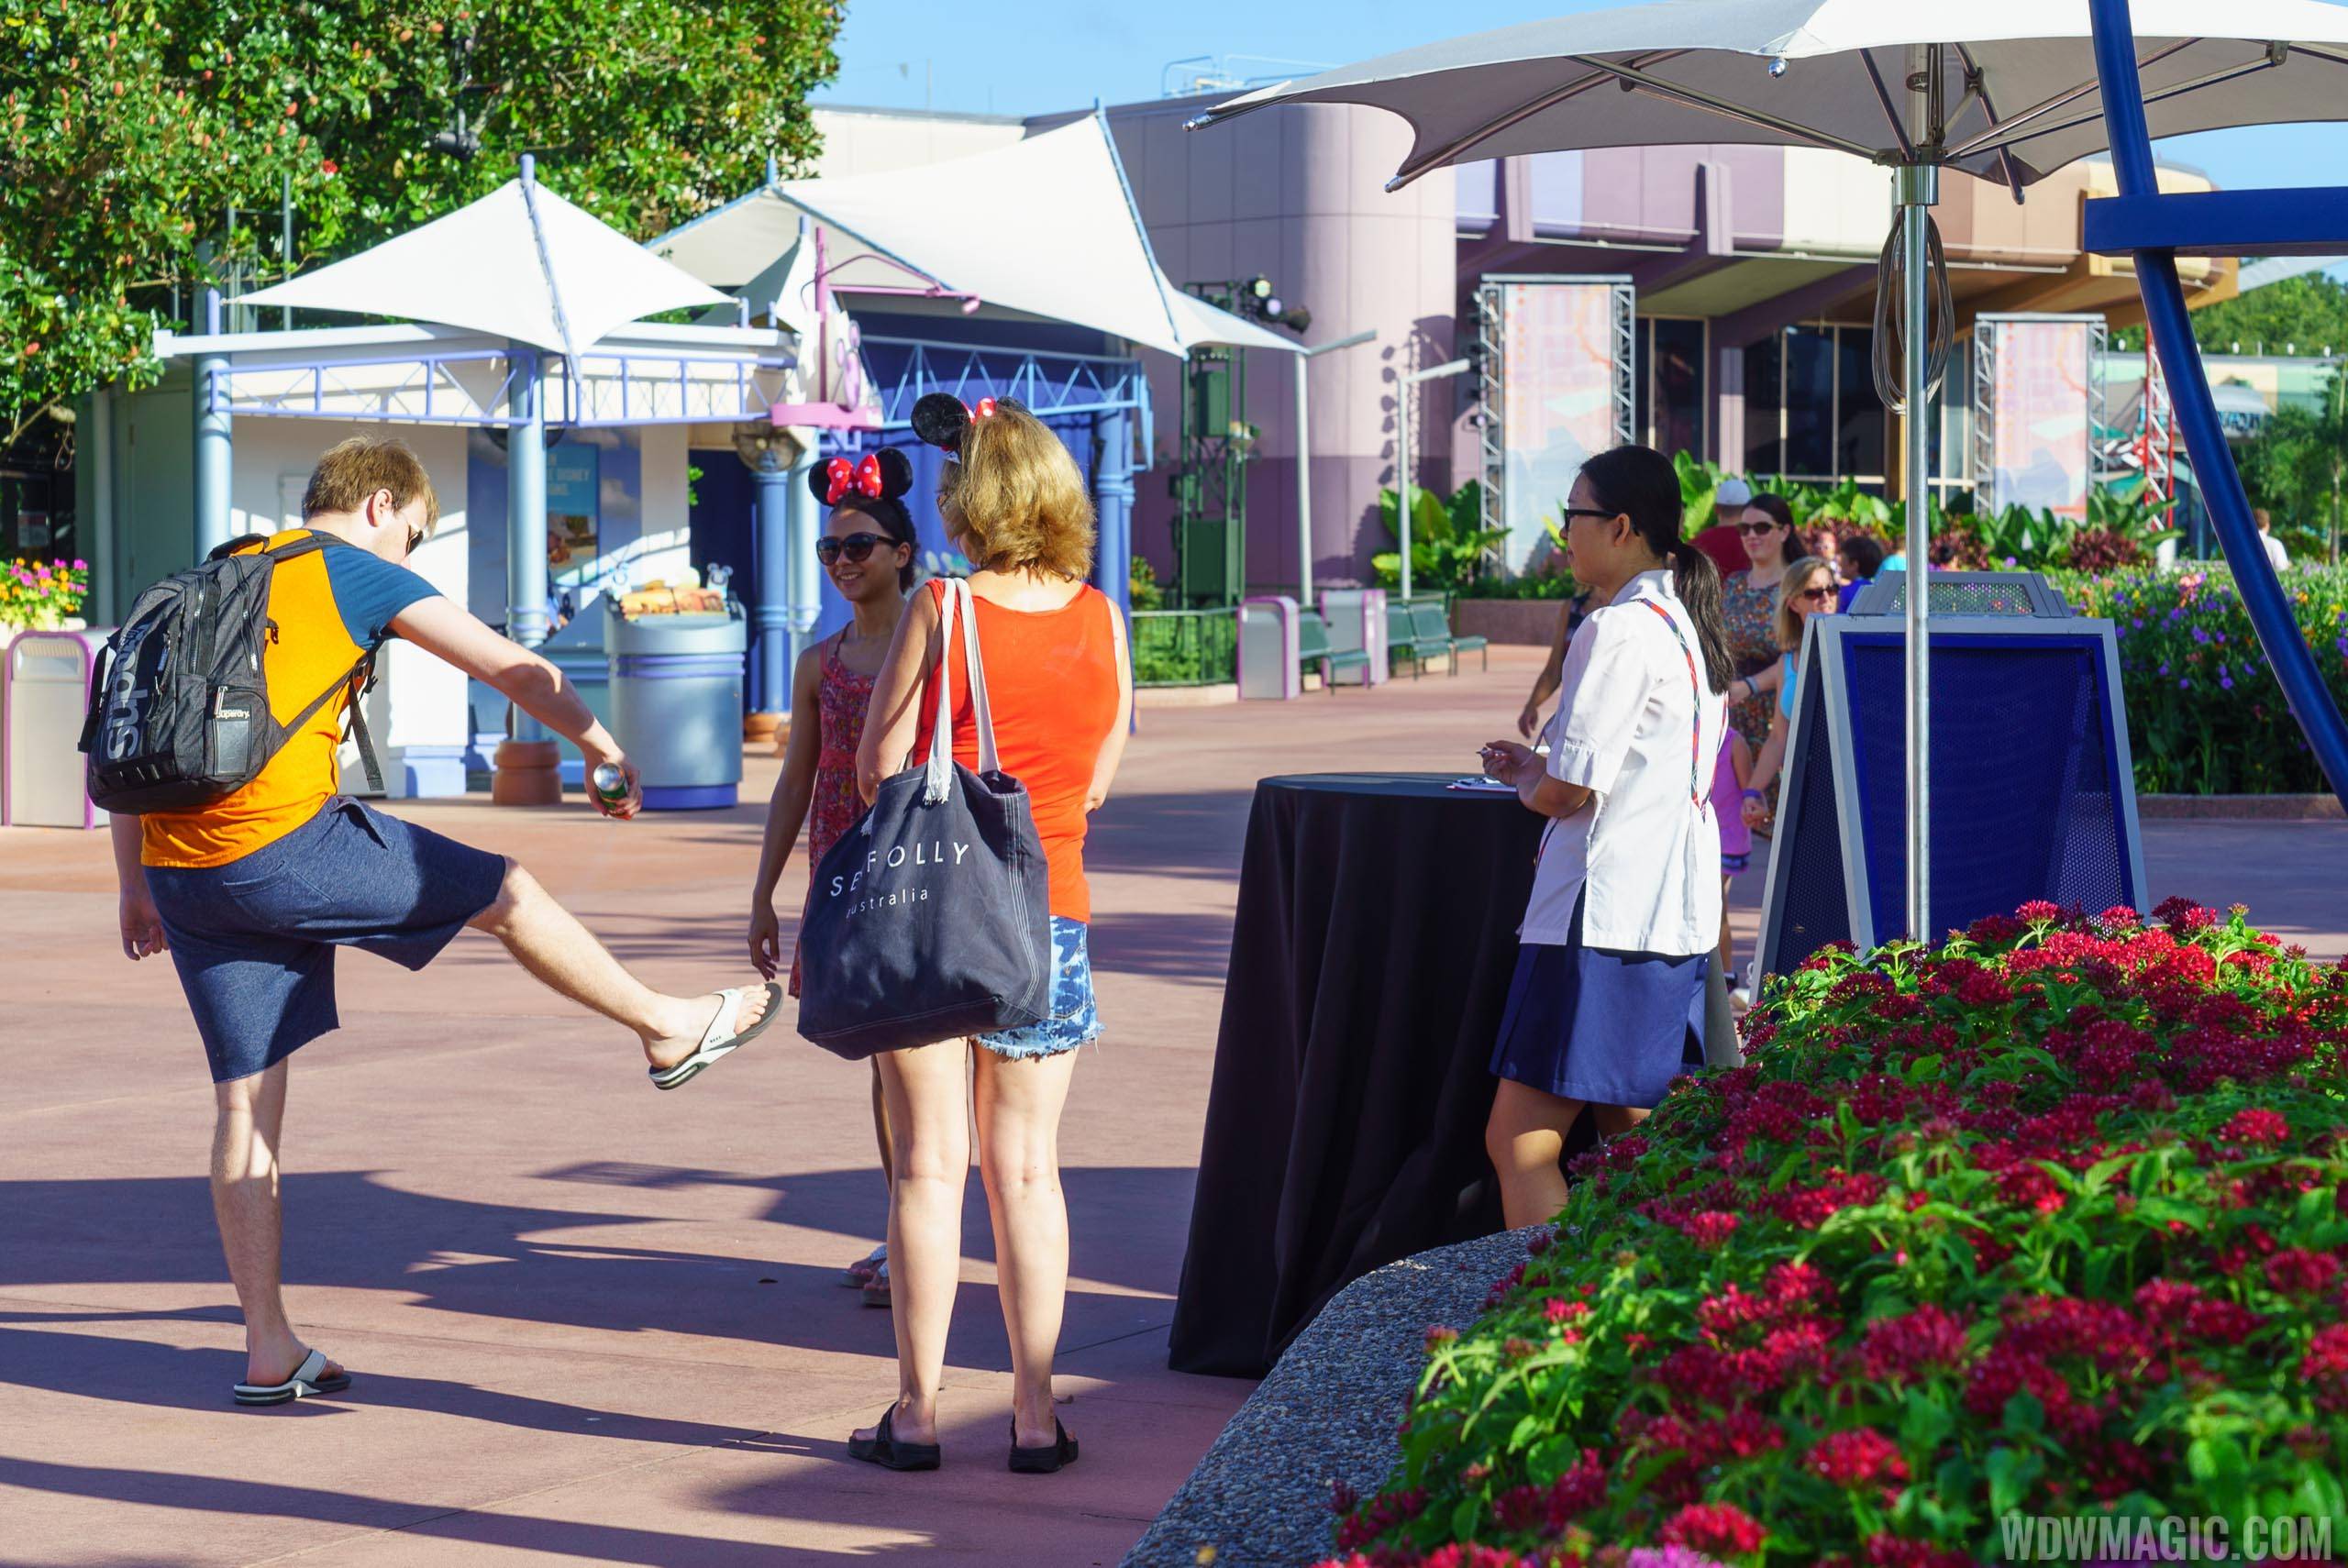 Guests making use of the complimentary insect repellent at Epcot